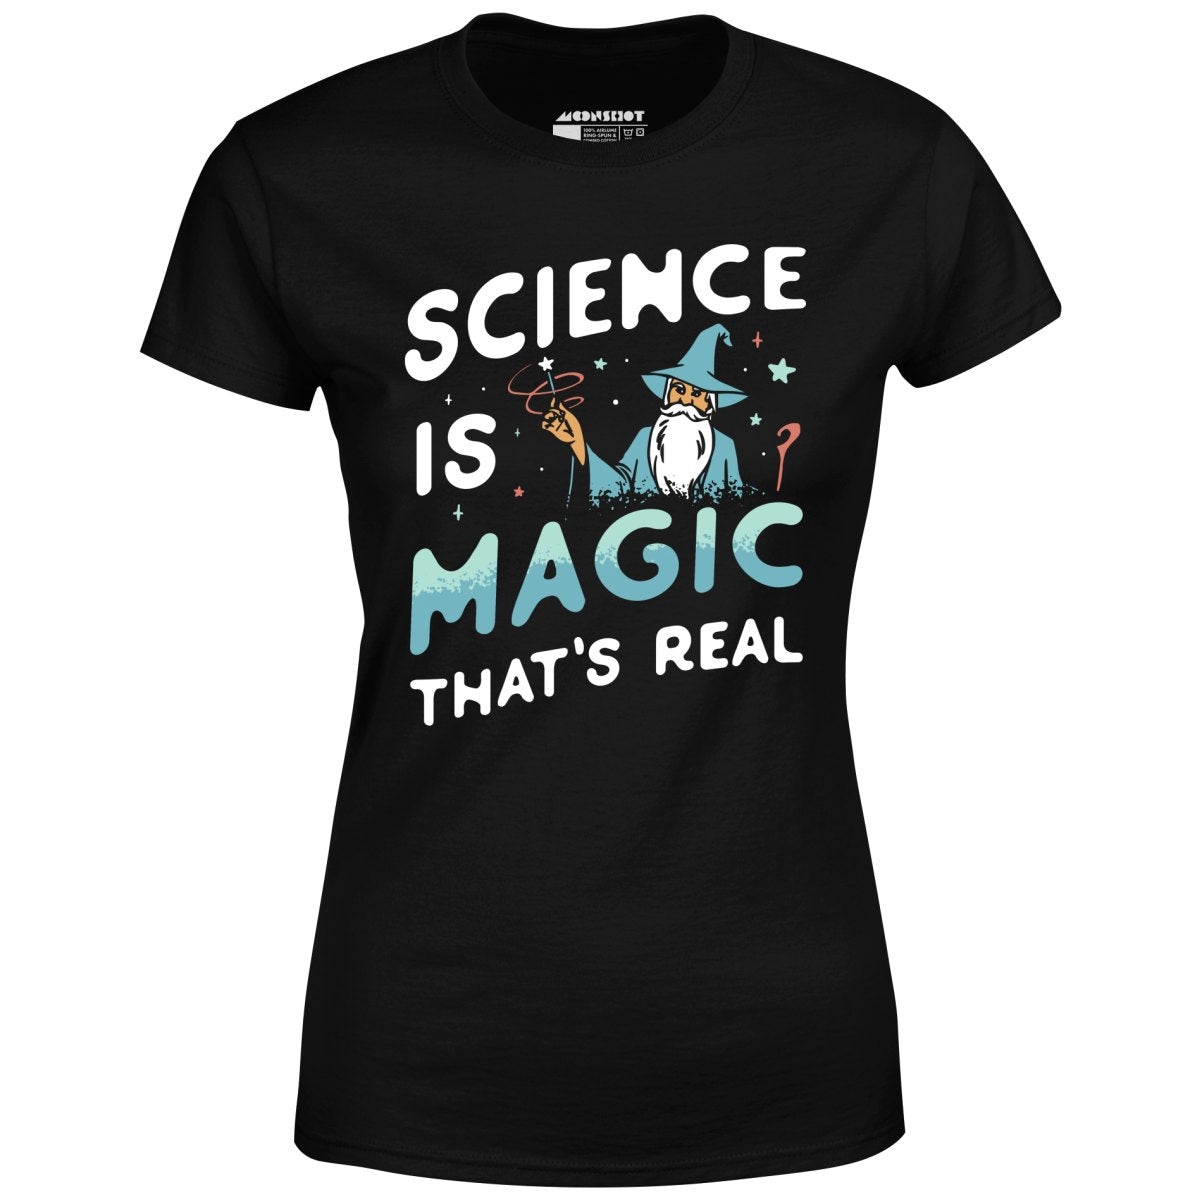 Science is Magic That's Real - Women's T-Shirt